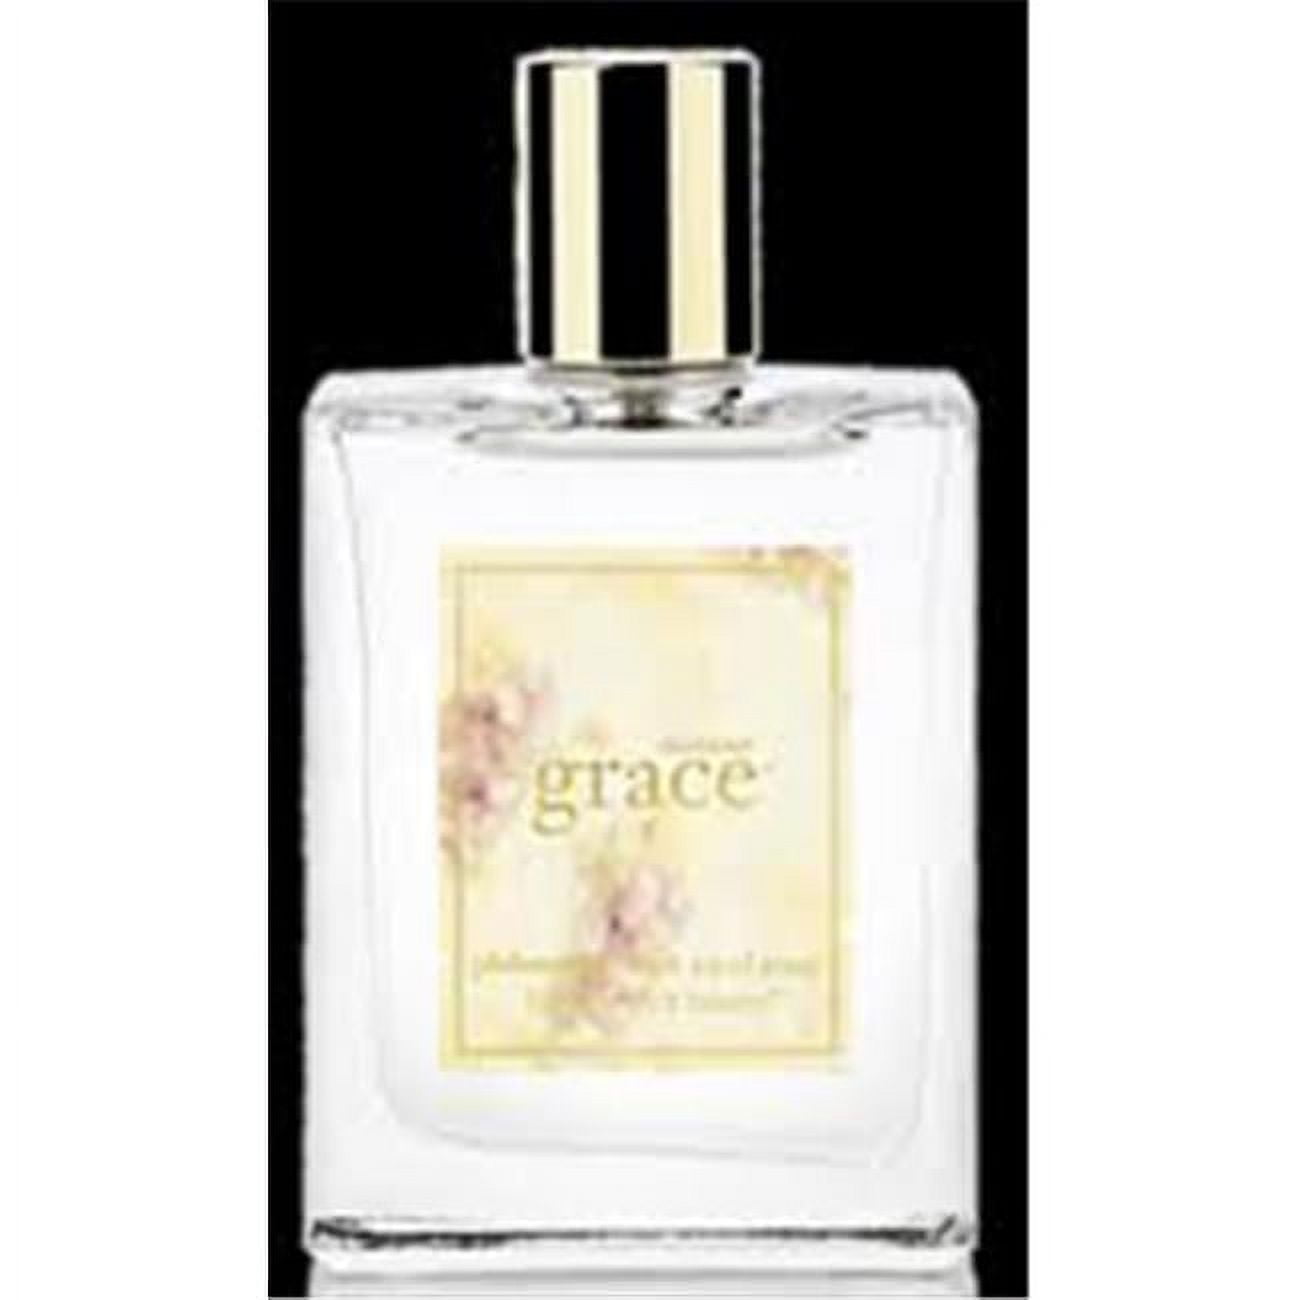 Loving this limited edition: philosophy pure grace endless summer 